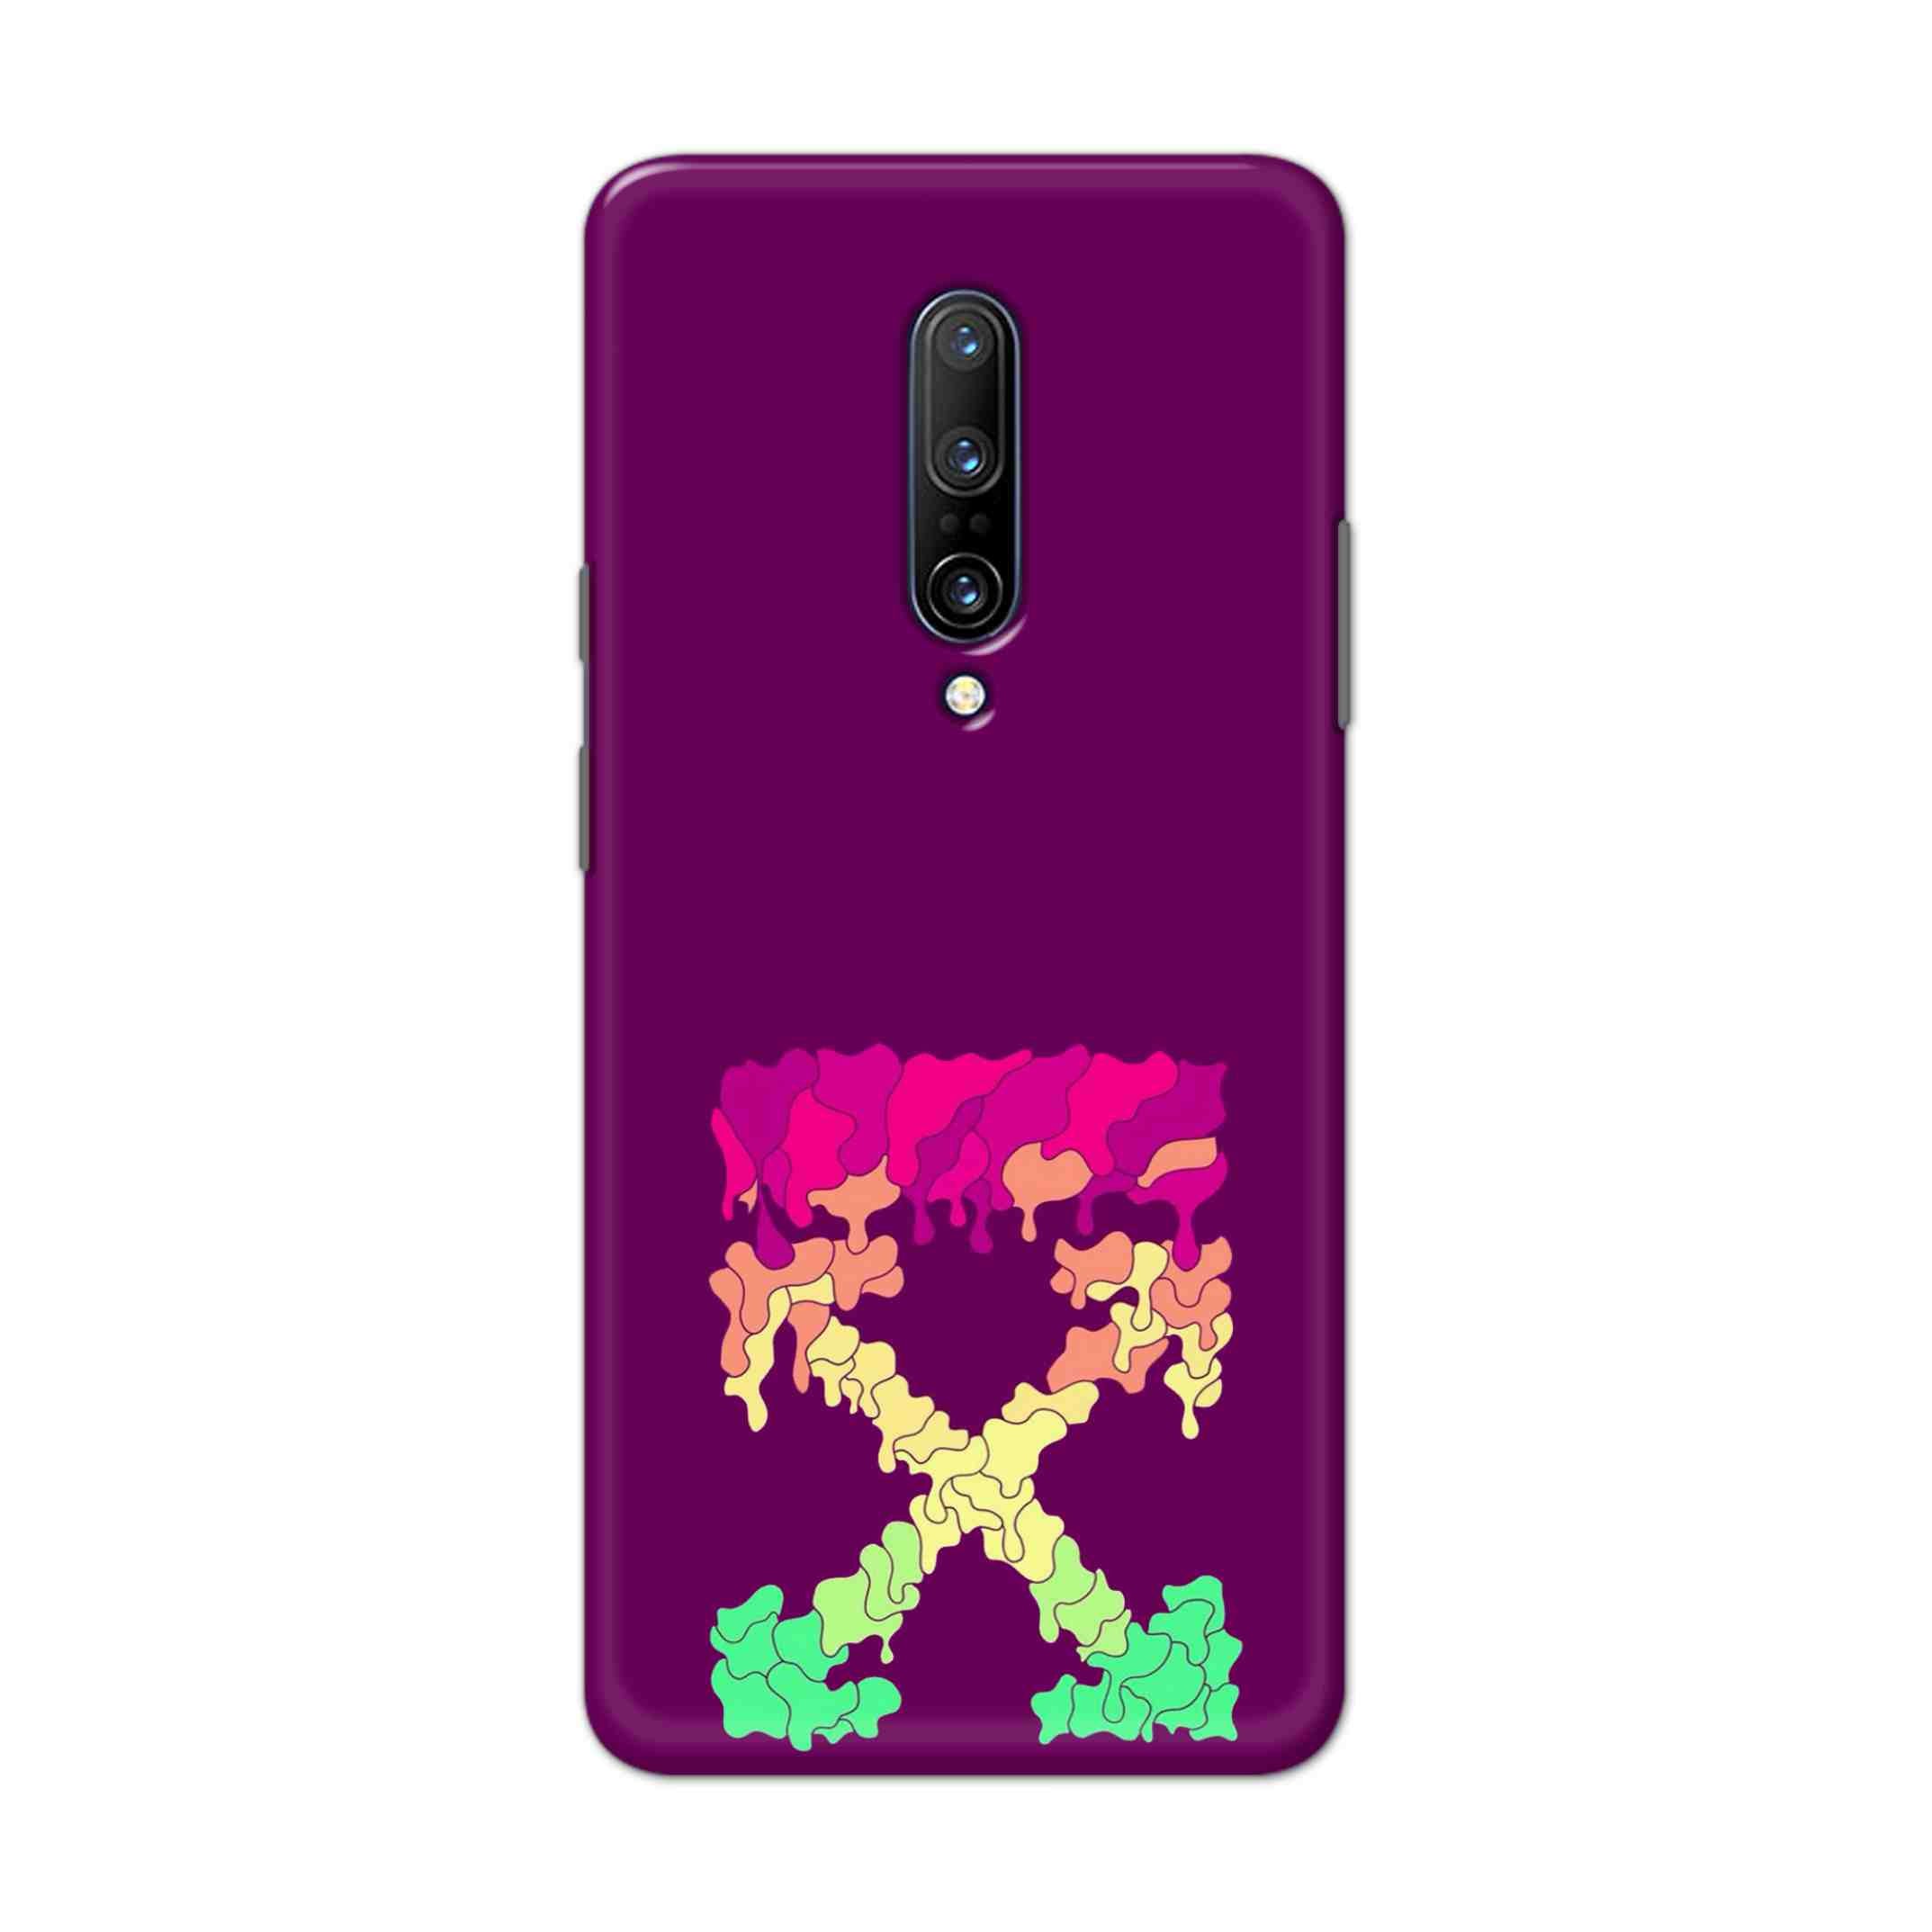 Buy X.O Hard Back Mobile Phone Case Cover For OnePlus 7 Pro Online